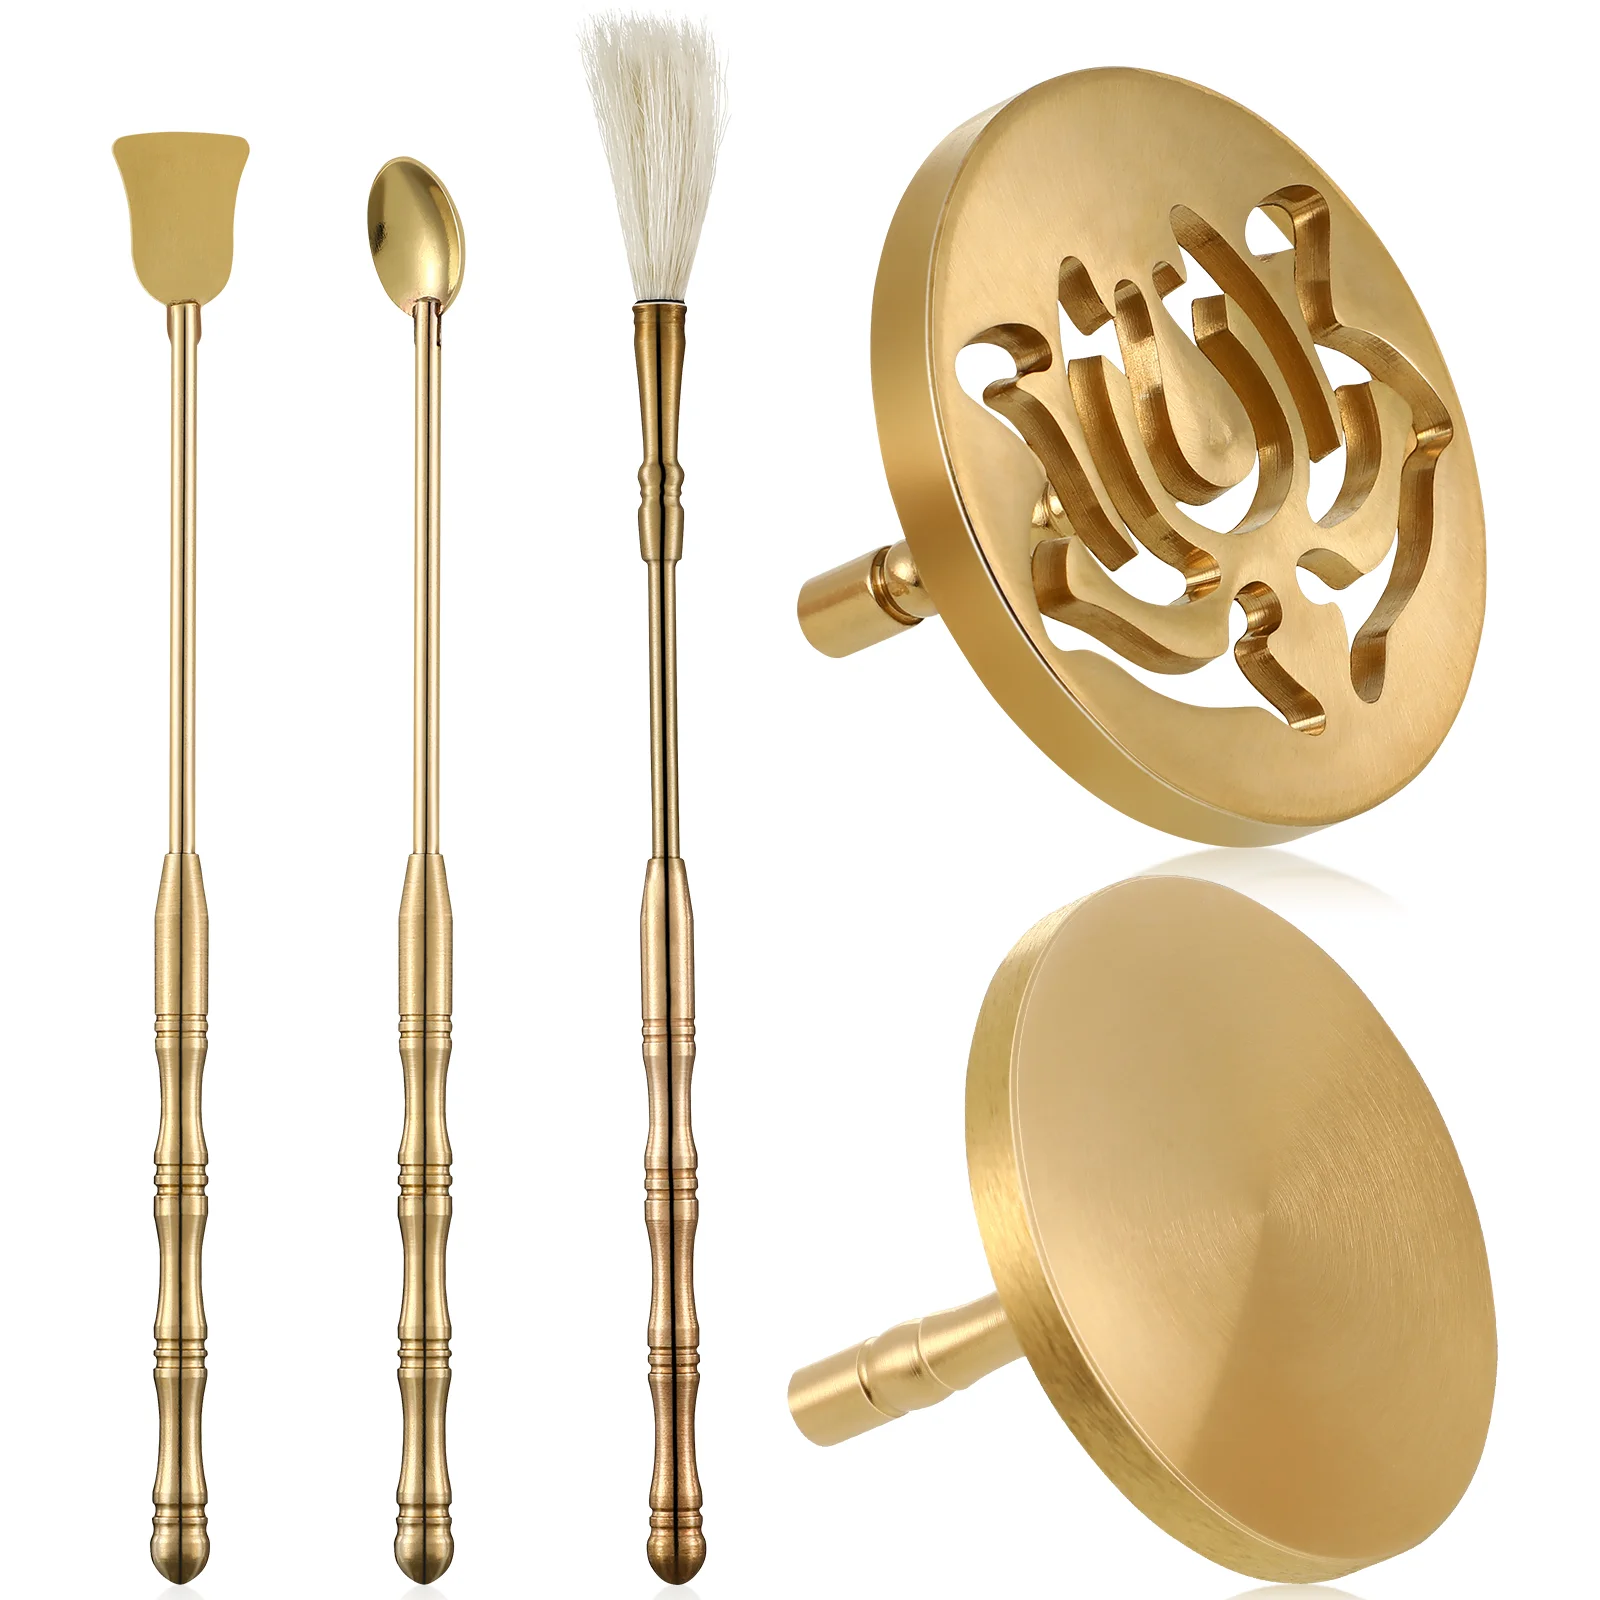 

5 Pcs Brass Incense Molds Tools Set Incense Spoon Press Brush Mold DIY Fragrance Accessory for Home Yoga Meditation